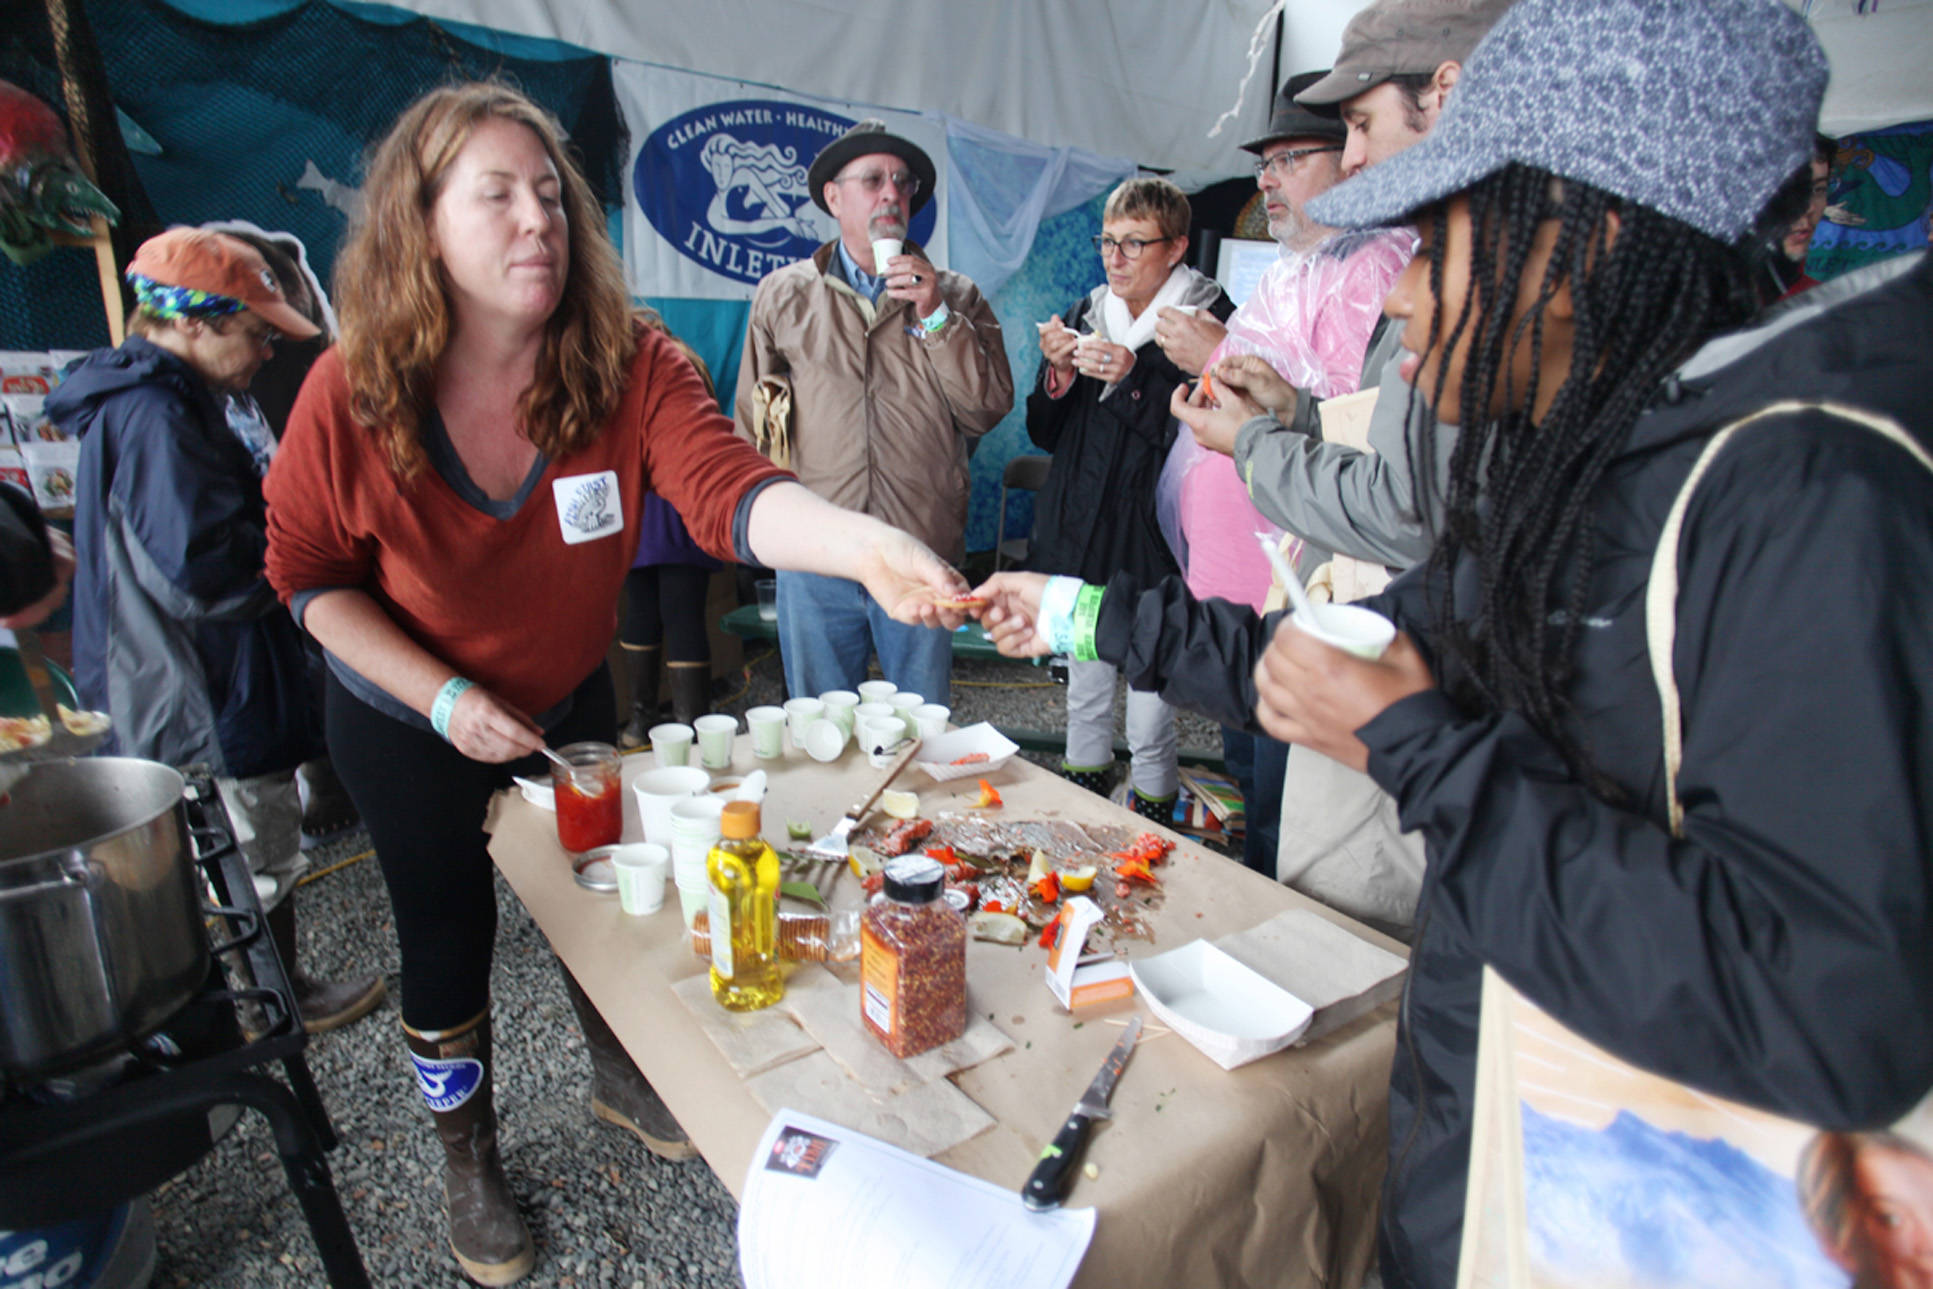 Christina Randall participates in a workshop presented by Maria Finn, author of “The Whole Fish, How Adventurous Eating of Seafood Will Make you Healthier, Sexier and Help Save the Ocean” on how to use every part of the salmon Aug. 7, 2016 at Salmonfest 2016 in Ninilchik, Alaska. (File Photo by Kelly Sullivan/ Peninsula Clarion)